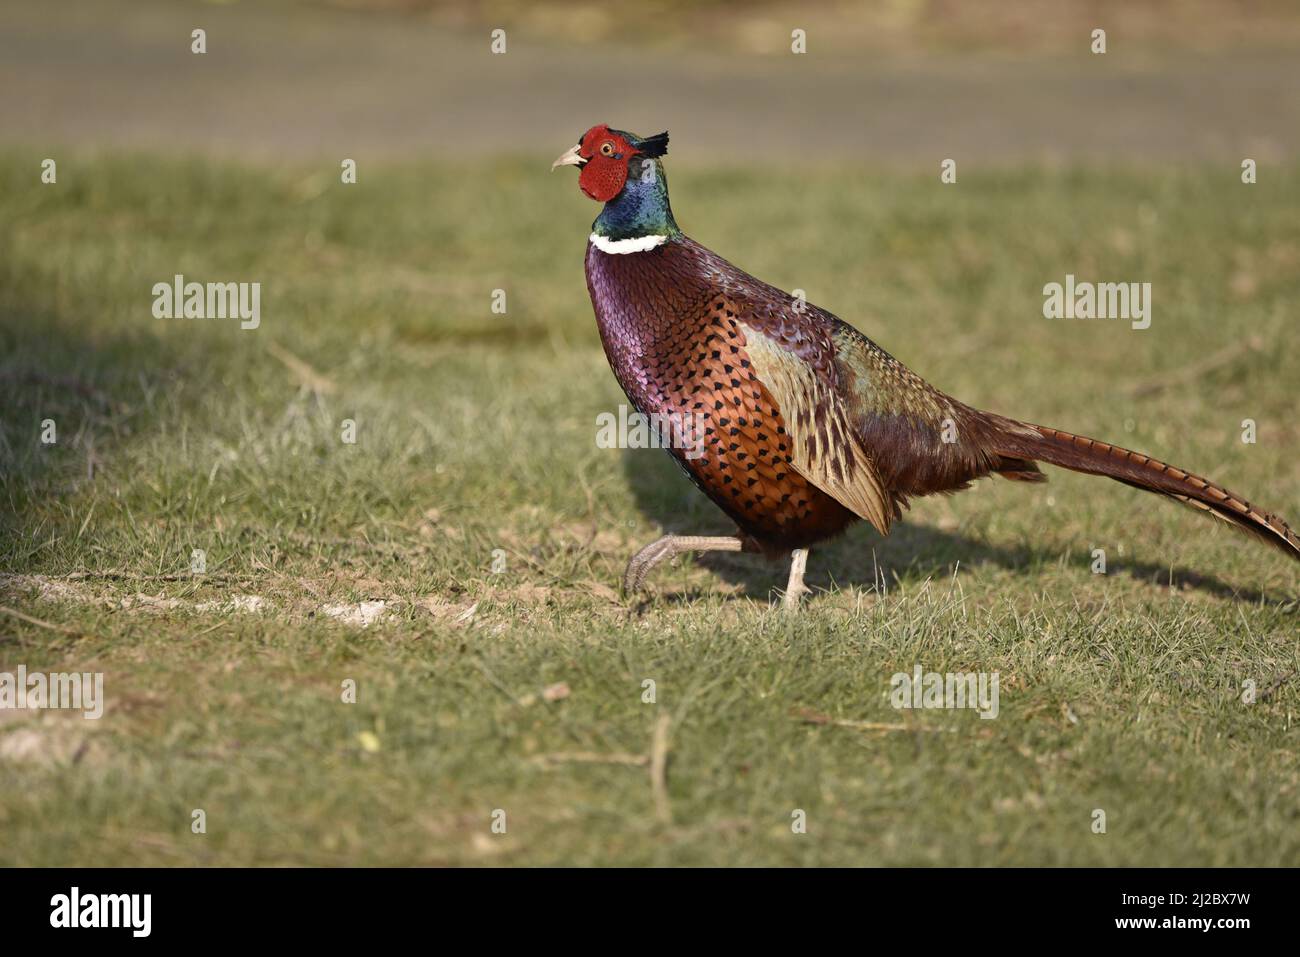 Close-Up Left-Profile Sunlit Image of a Male Common Pheasant (Phasianus colchicus) Walking Right to Left Across Grass in Mid-Wales, UK in March Stock Photo